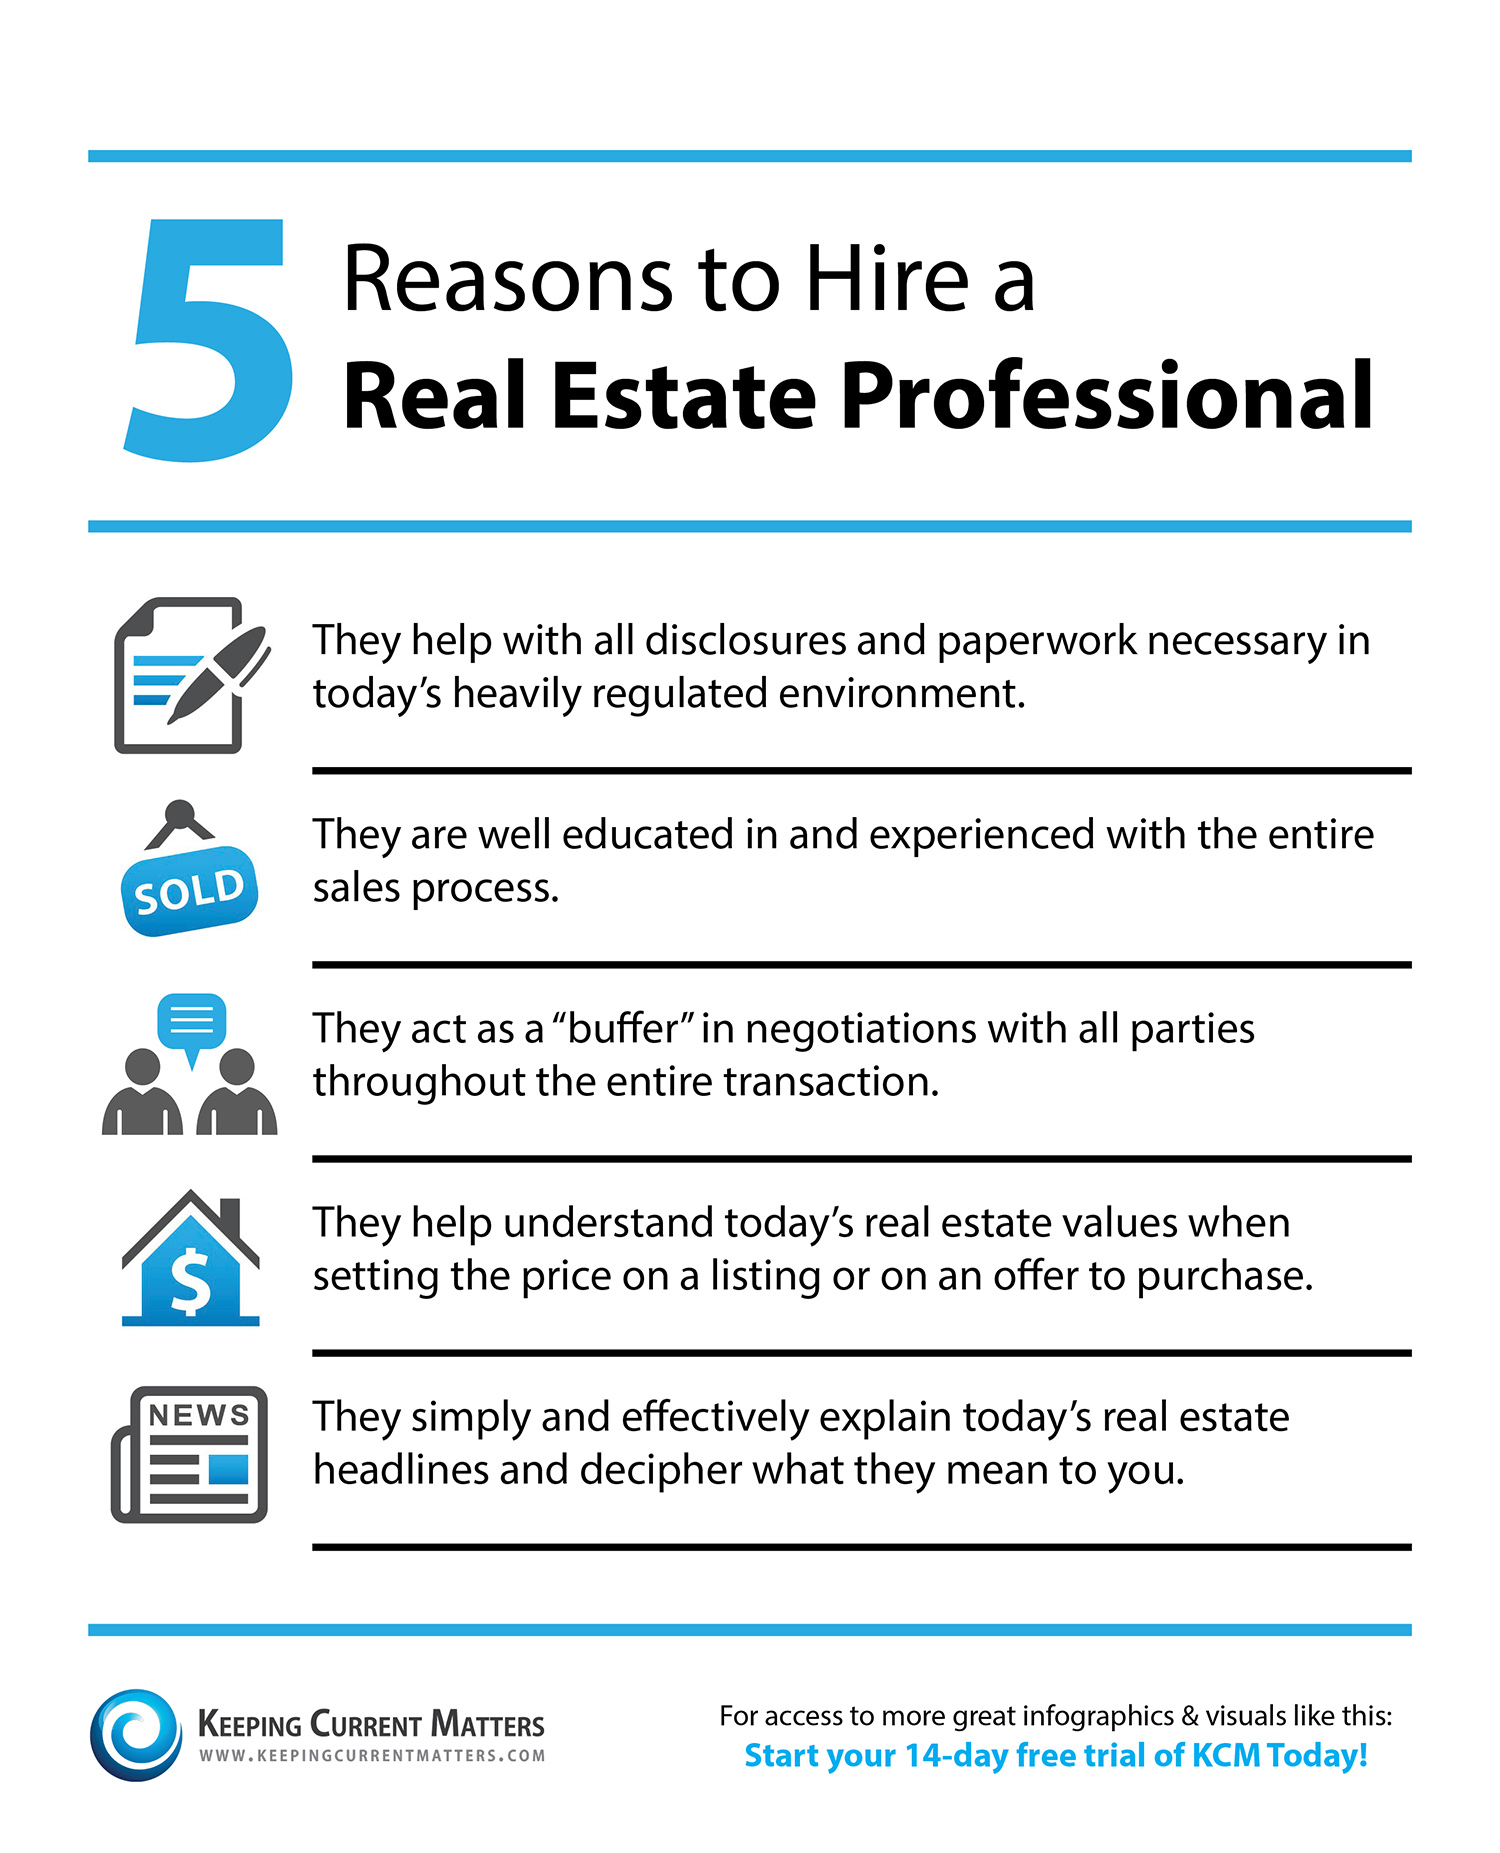 5 Reasons to Hire a Real Estate Professional | The KCM Crew